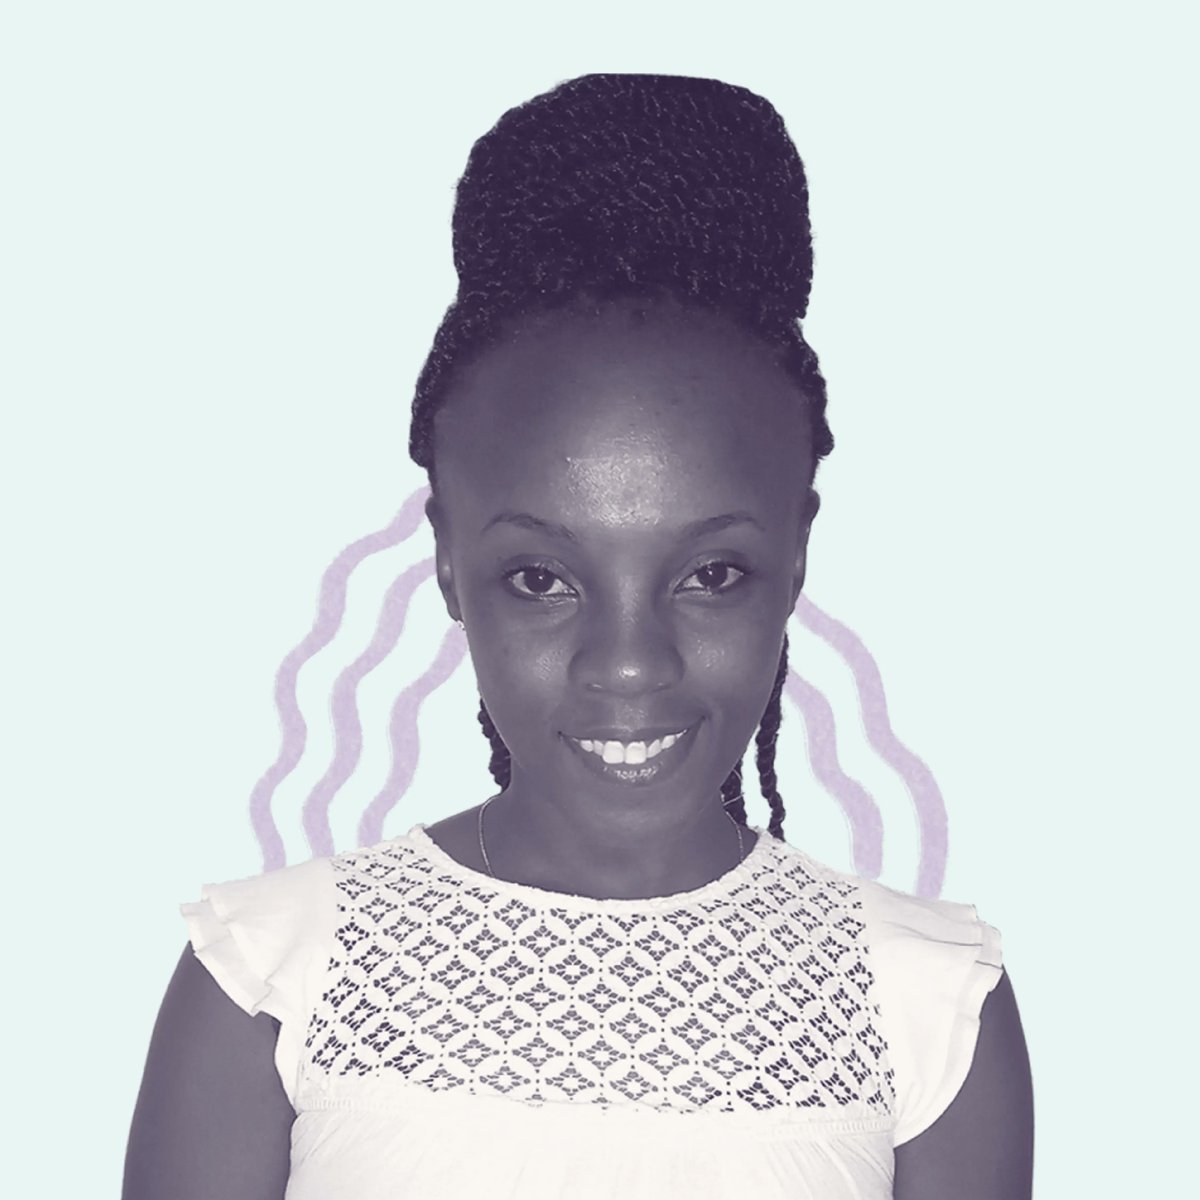 Staff Spotlight 🌟: Meet our new Product Manager, Mary Mbuvi! As a PM, Mary is passionate about understanding and solving the needs of young people through digital solutions. She enjoys reading books, hiking, bike riding, and is a nature enthusiast! Welcome to the team, Mary! 💜